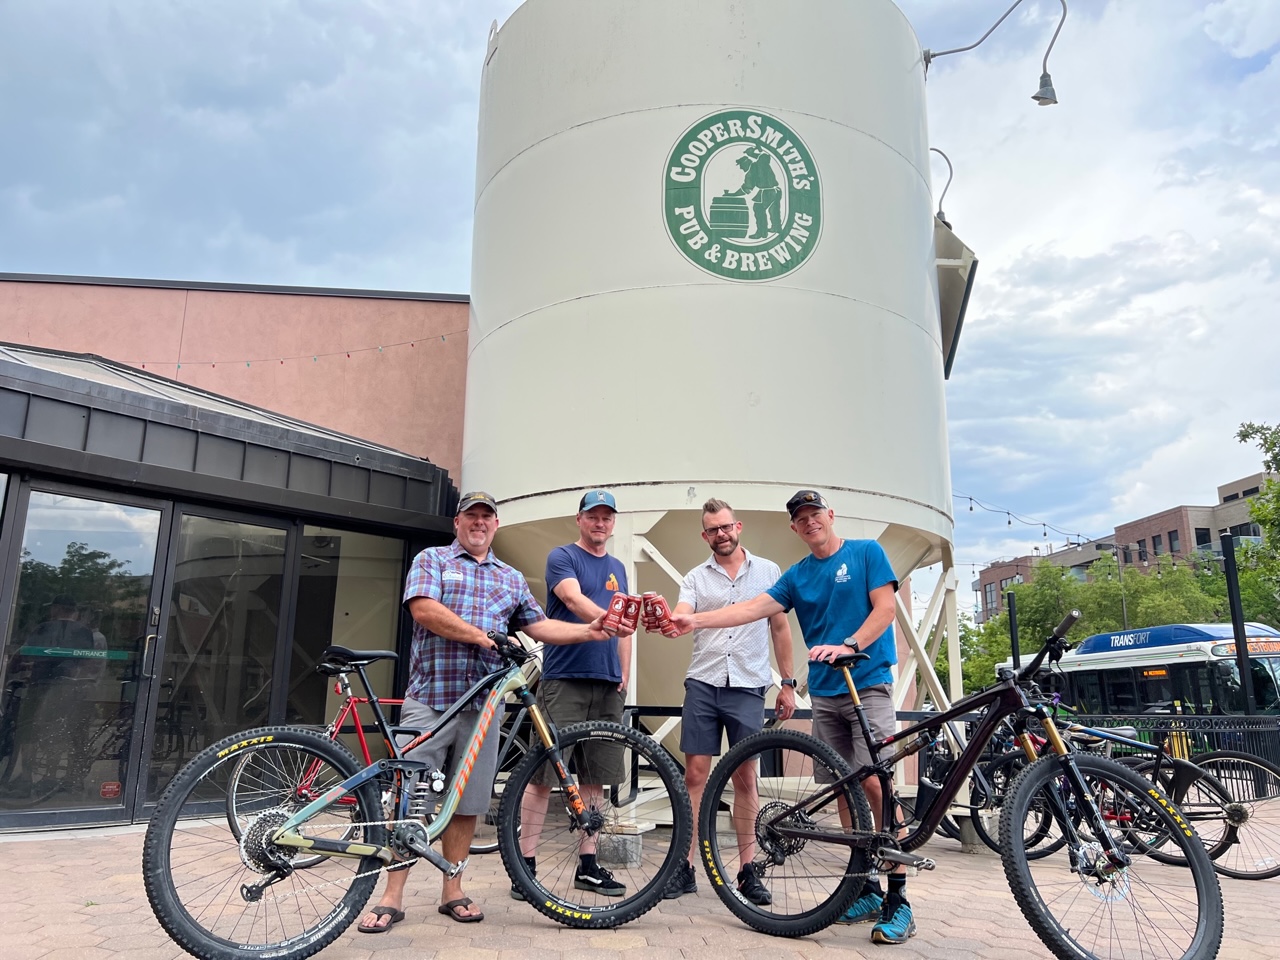 CooperSmith's raises beers and $809 for Overland Mountain Bike Association with Overland Trail Beer.